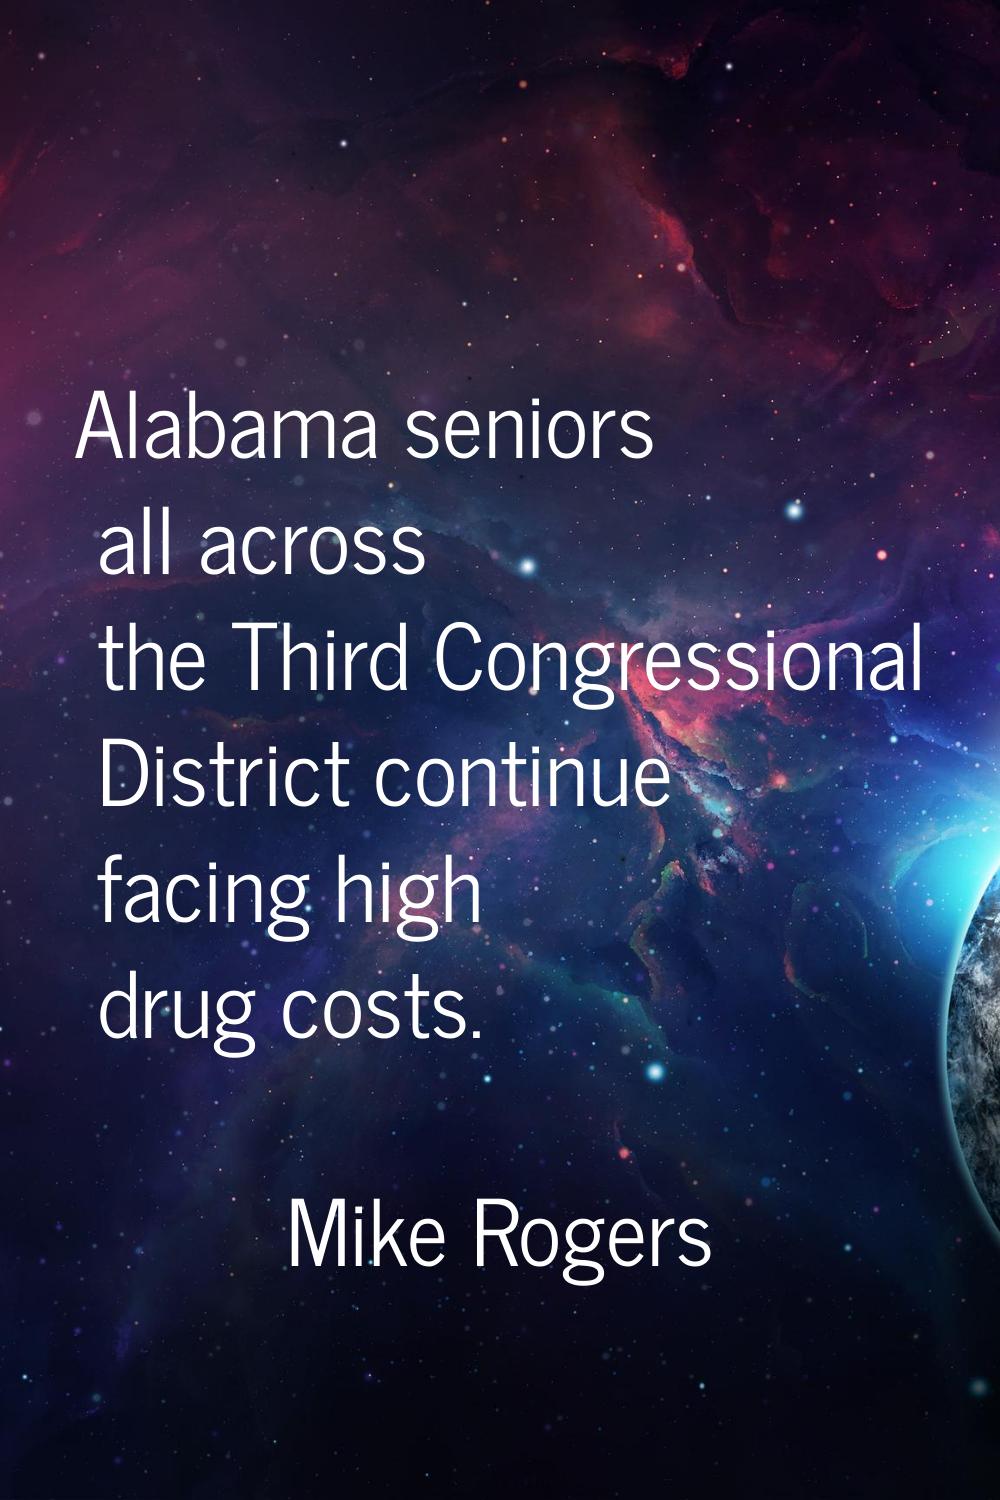 Alabama seniors all across the Third Congressional District continue facing high drug costs.